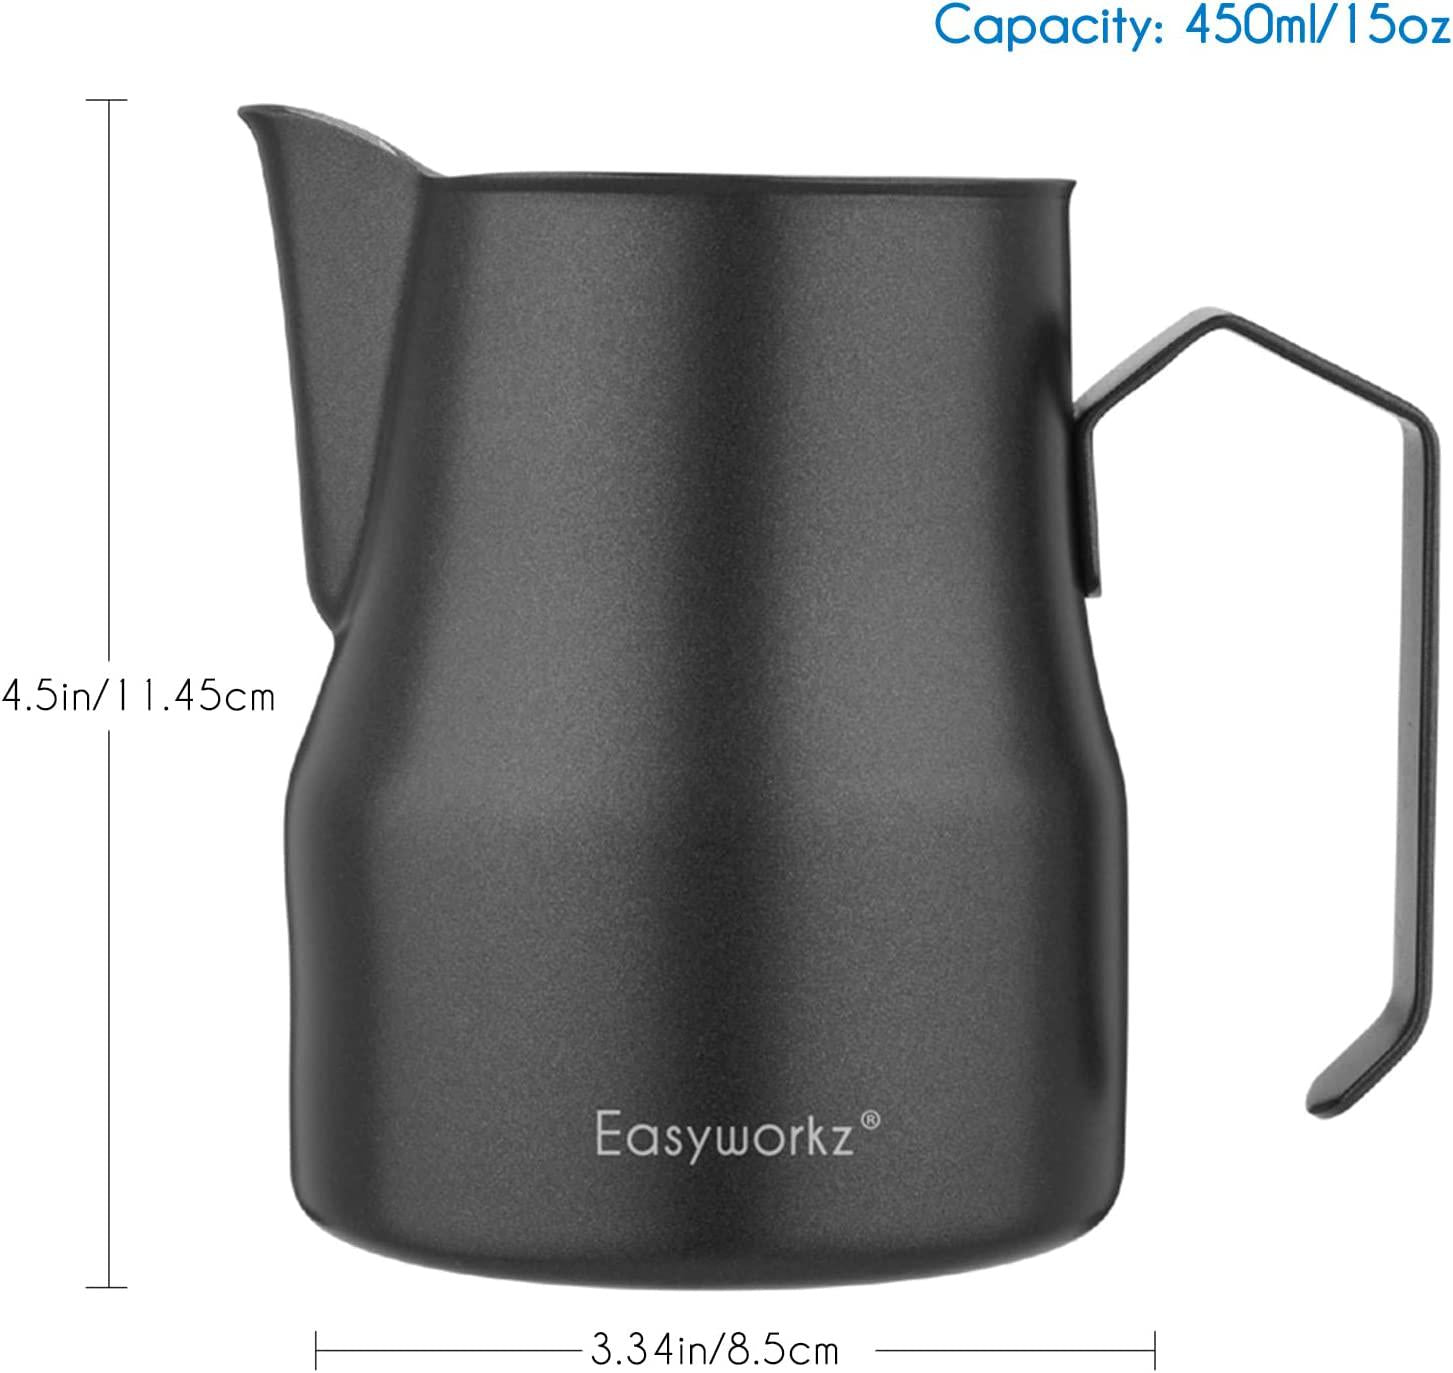 Easyworkz, Easywork Espresso Steaming Pitcher 450ml Stainless Steel Coffee Frothing Picther Milk Jug Cup Cappuccino Latte Art Cup